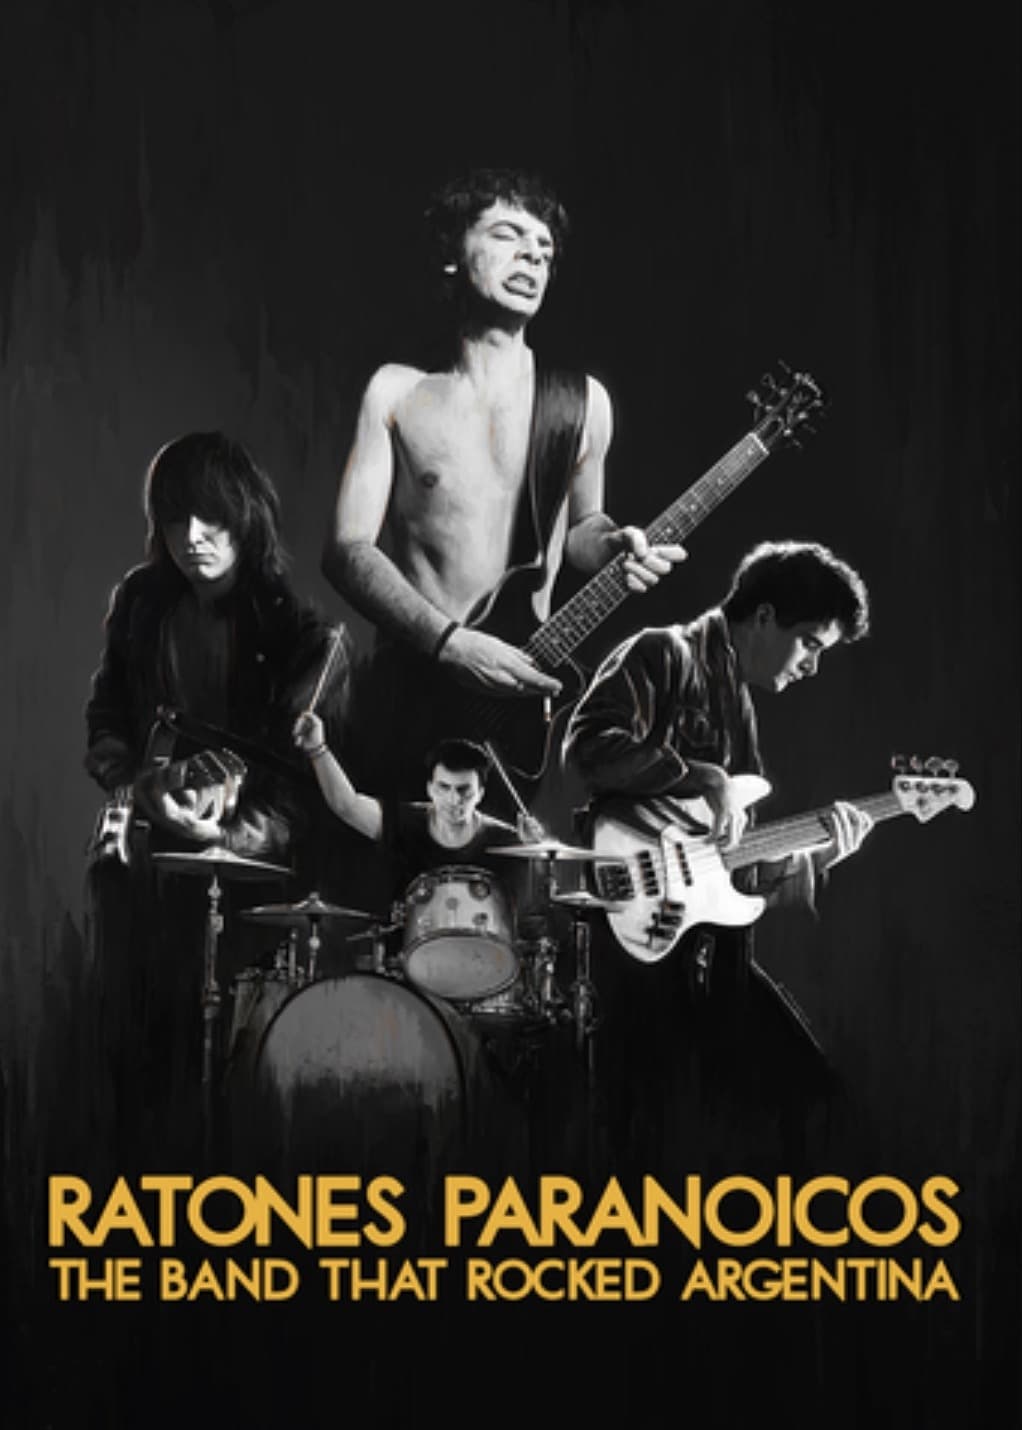 Ratones Paranoicos: The Band That Rocked Argentina